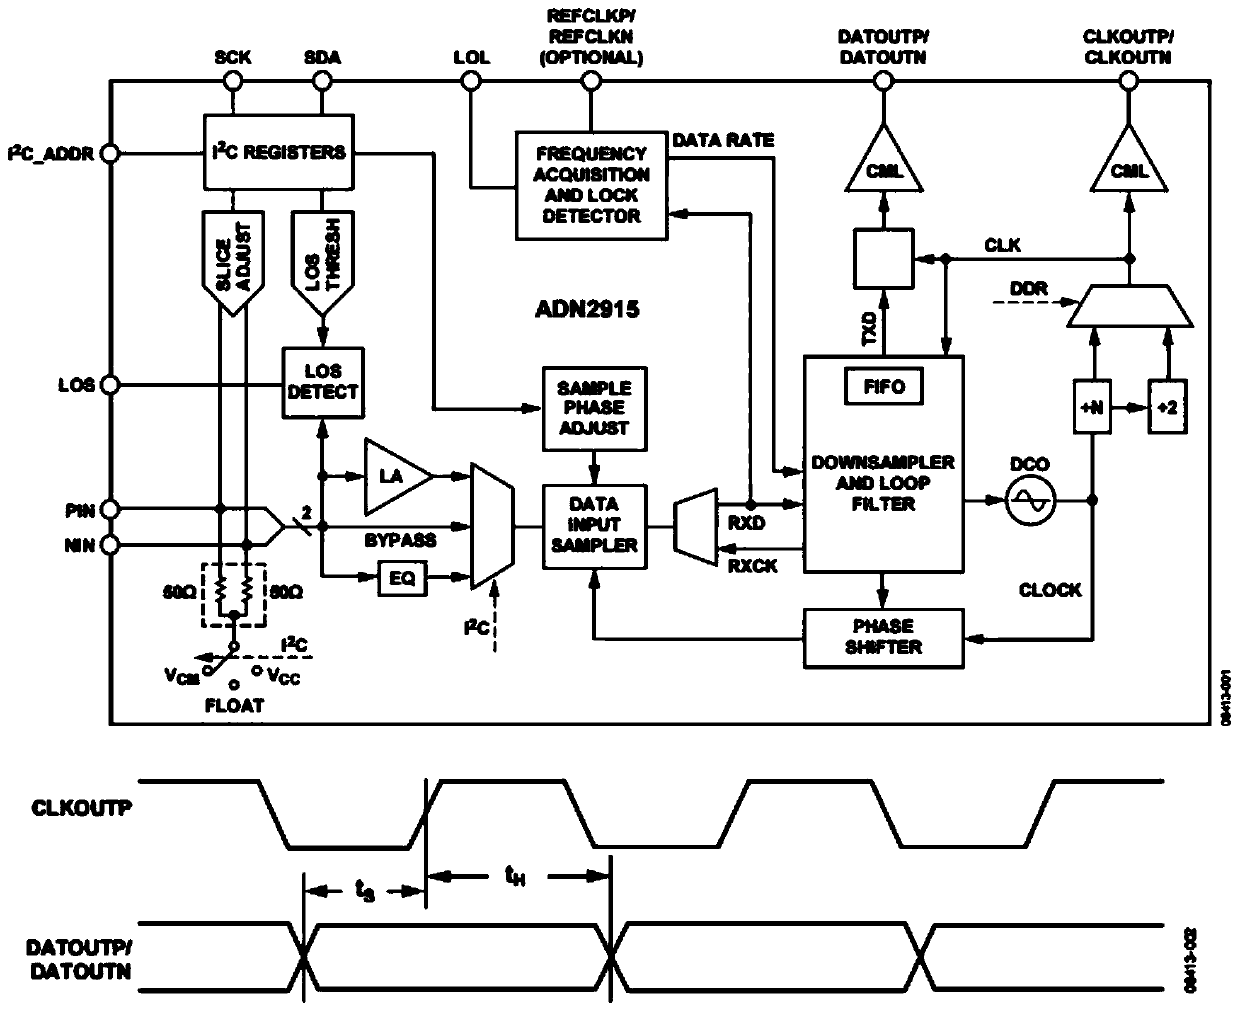 Analog-digital hybrid high-speed signal time measurement system based on clock data recovery